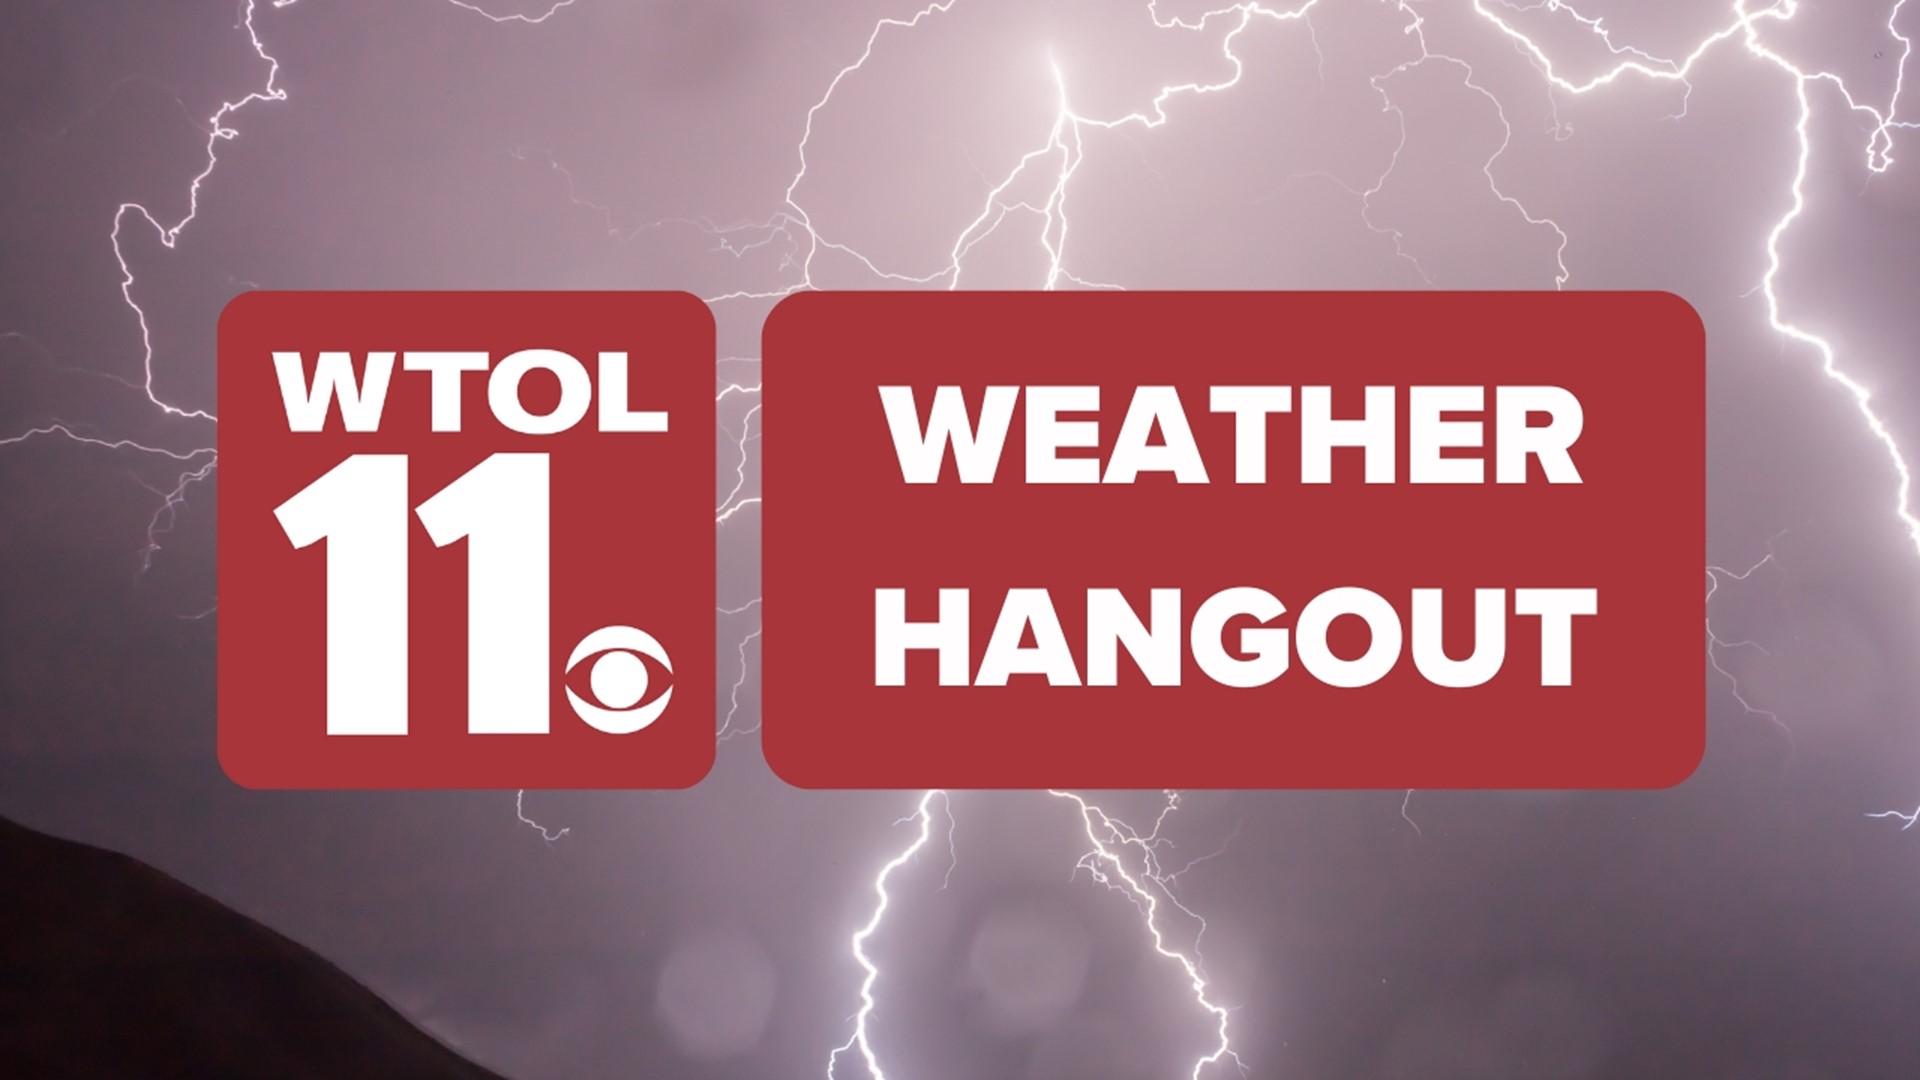 Catch up with WTOL 11 meteorologists in this week's Weather Hangout.